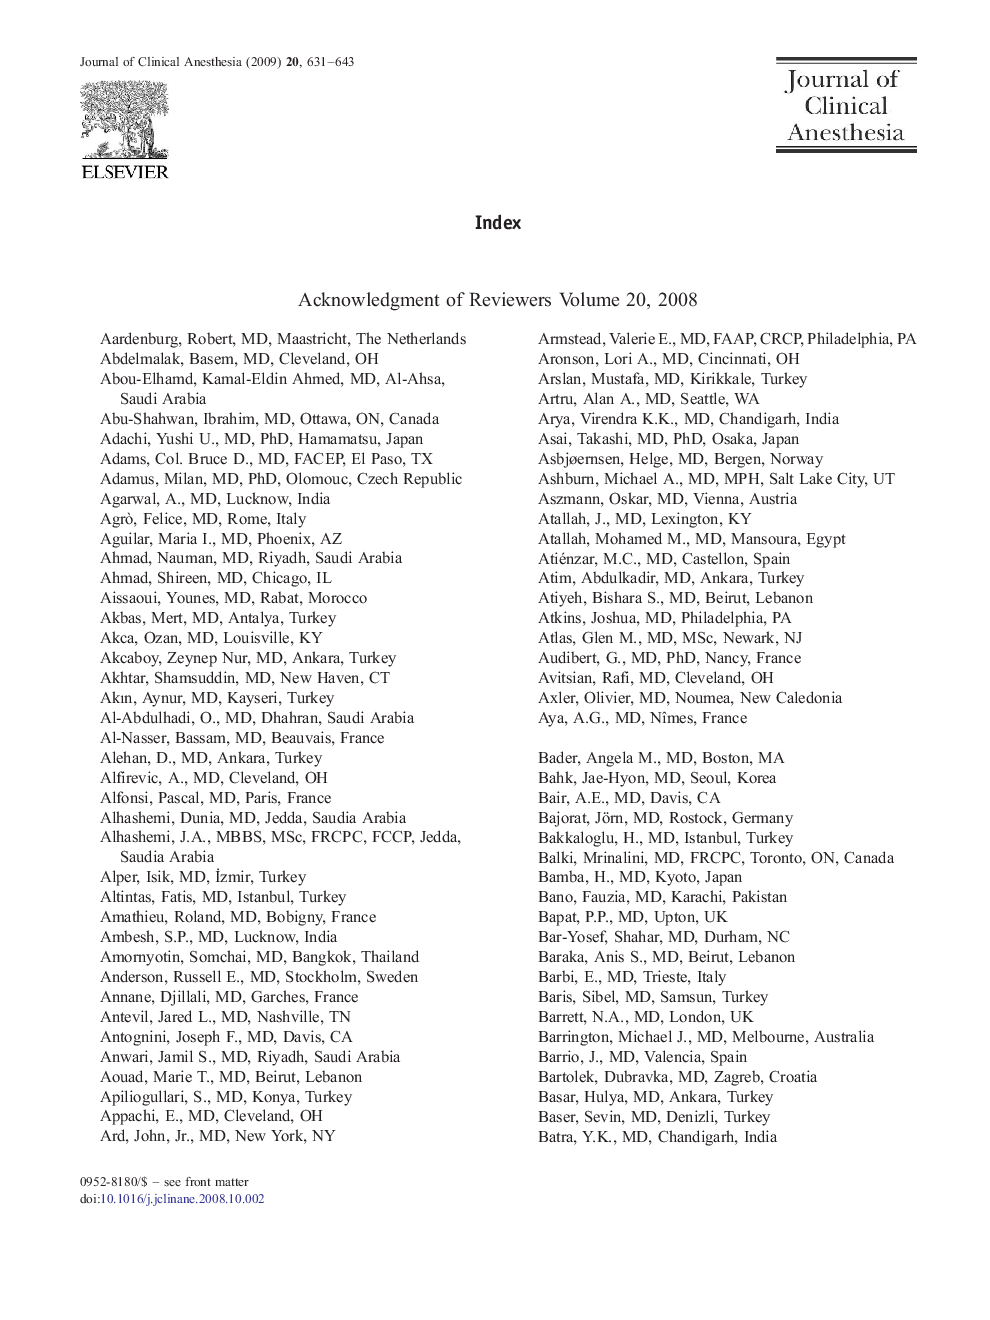 Acknowledgment of Reviewers Volume 20, 2008